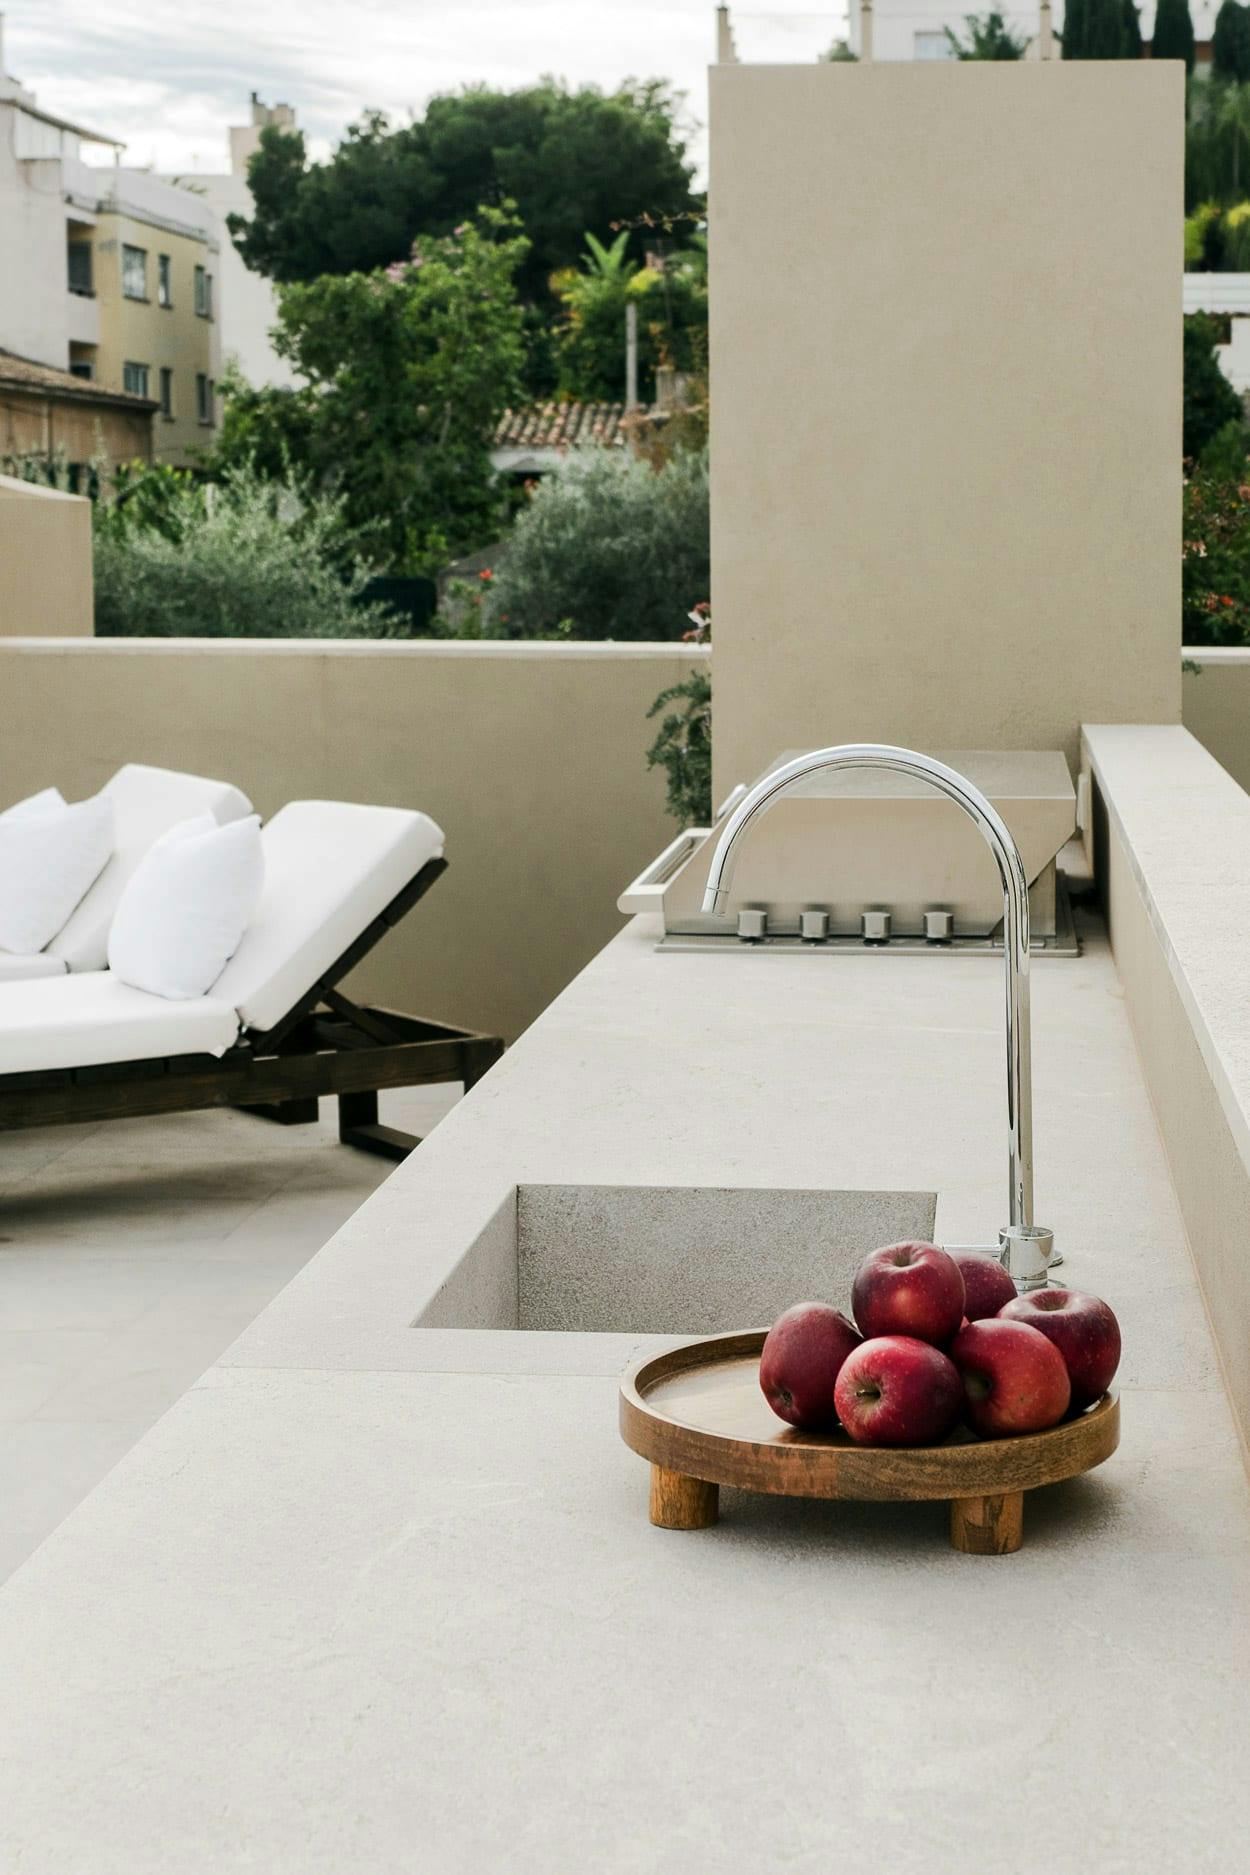 The image features a white bathroom with a sink, a bathtub, and a large bathtub filled with water. There is a wooden bowl on the countertop with a variety of fruits, including apples and oranges, placed on it.